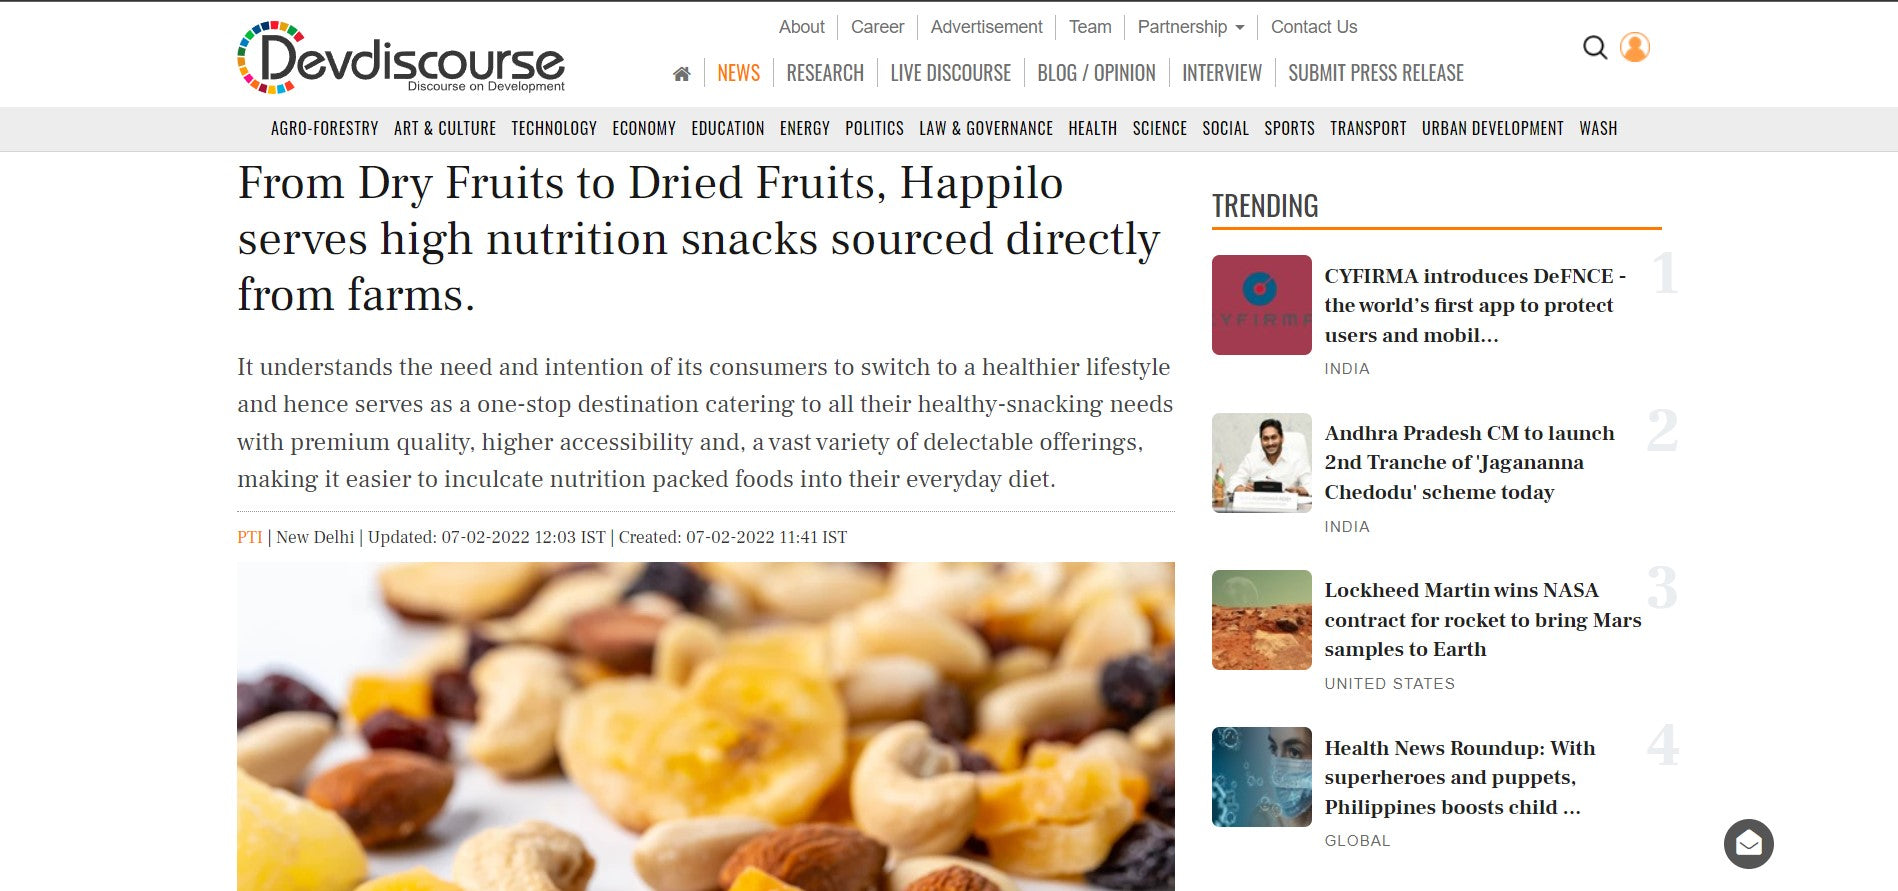 From Dry Fruits to Dried Fruits, Happilo serves high nutrition snacks sourced directly from farms